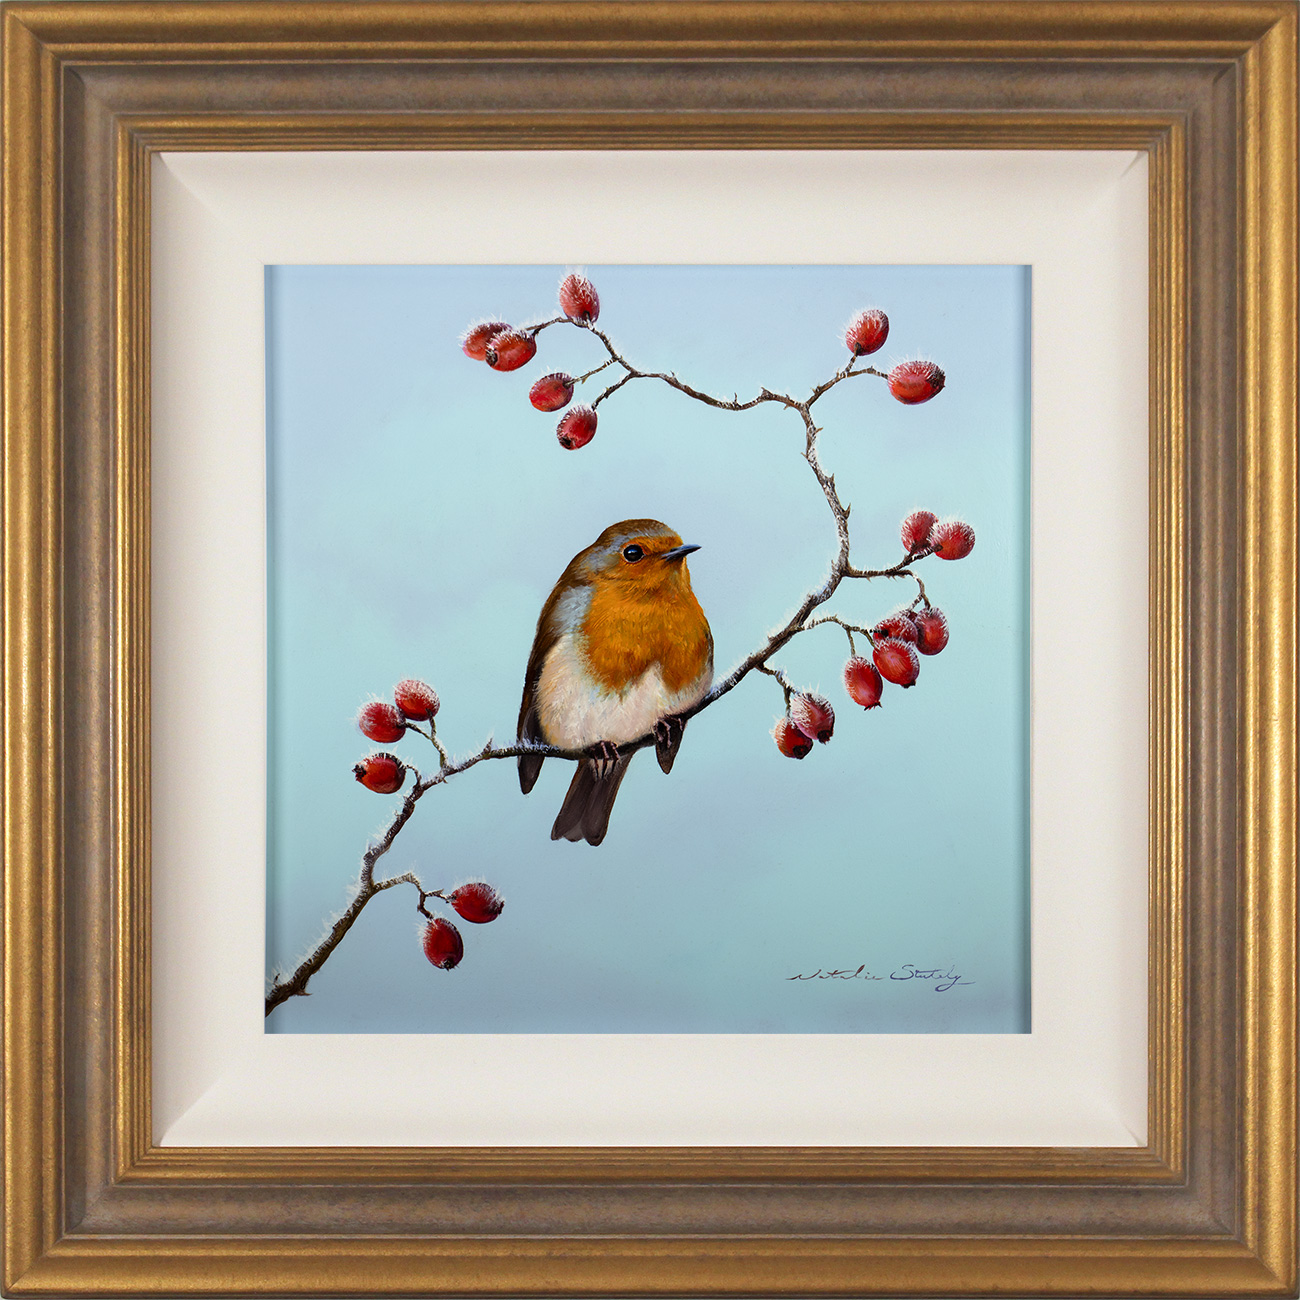 Natalie Stutely, Original oil painting on panel, Robin and Rosehips, click to enlarge